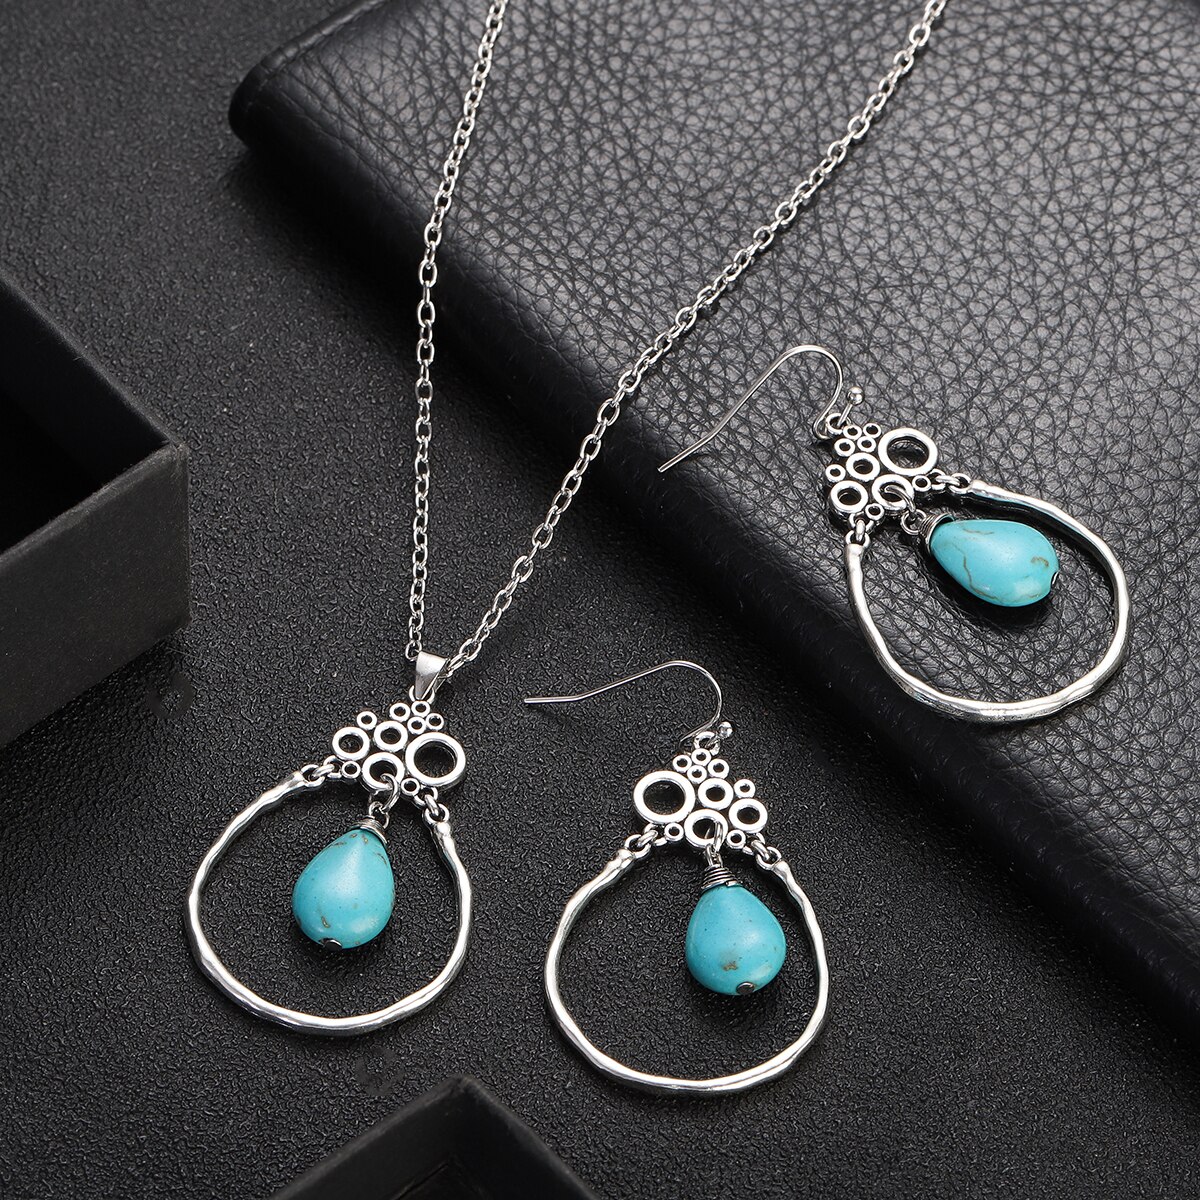 Classic-Ethnic-Silver-Color-Water-Drop-Jewelry-Sets-Ladies-Bohemia-Colorful-Flowers-Pendant-Necklace-1005004920943652-5